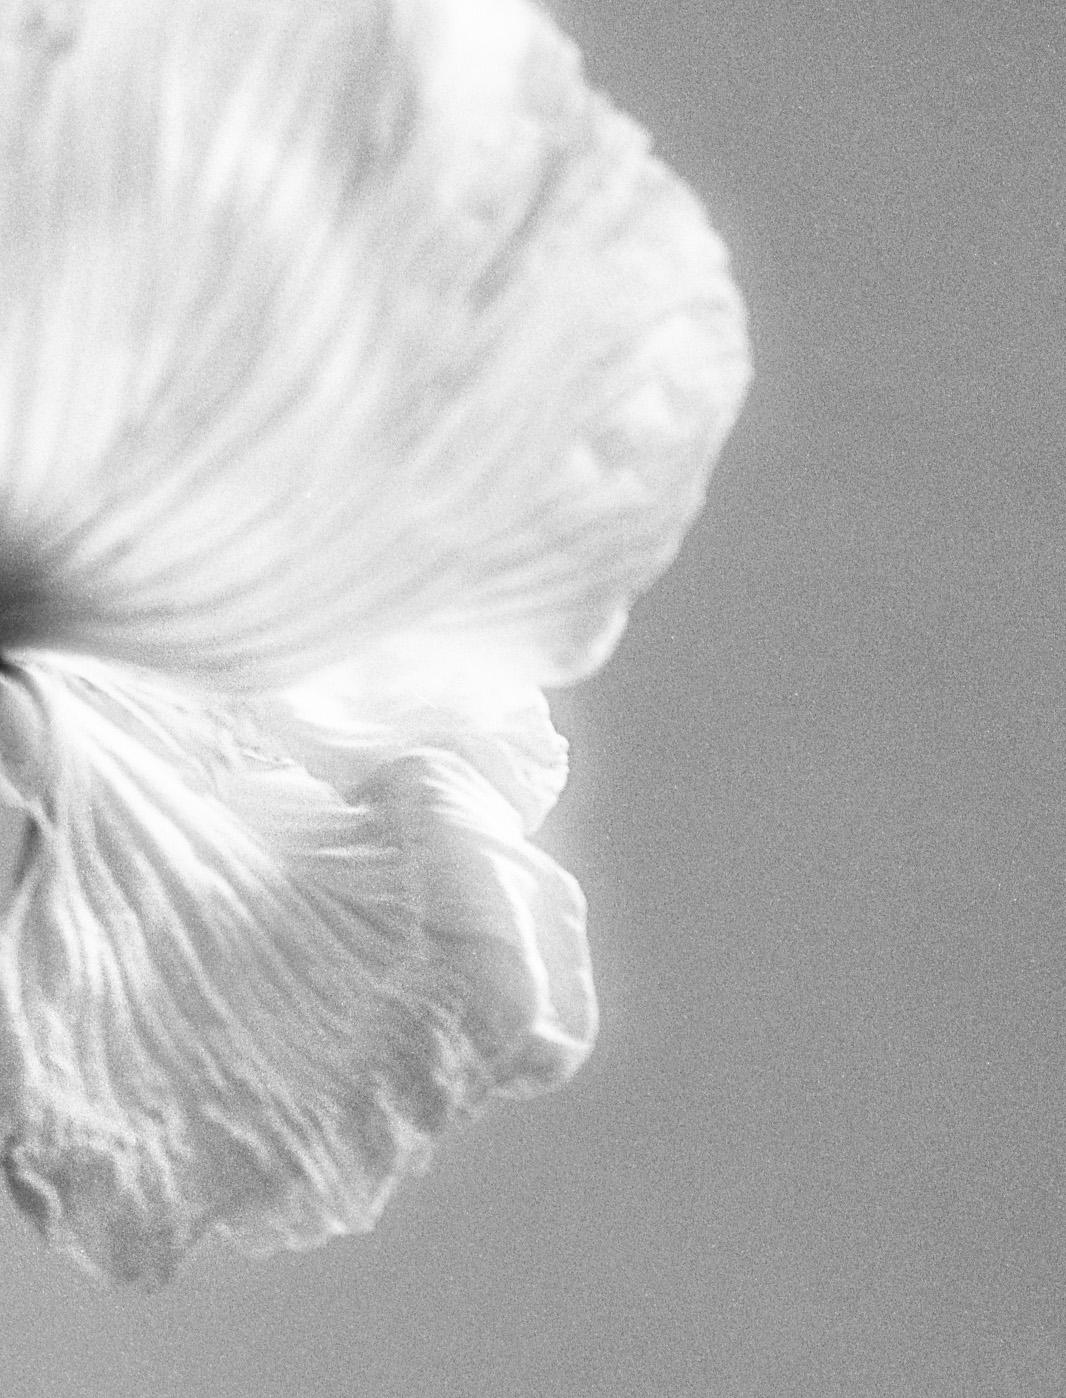 Poppy No.3 - Analogue black and white floral photography, Limited edition of 20. - Photograph by Ugne Pouwell